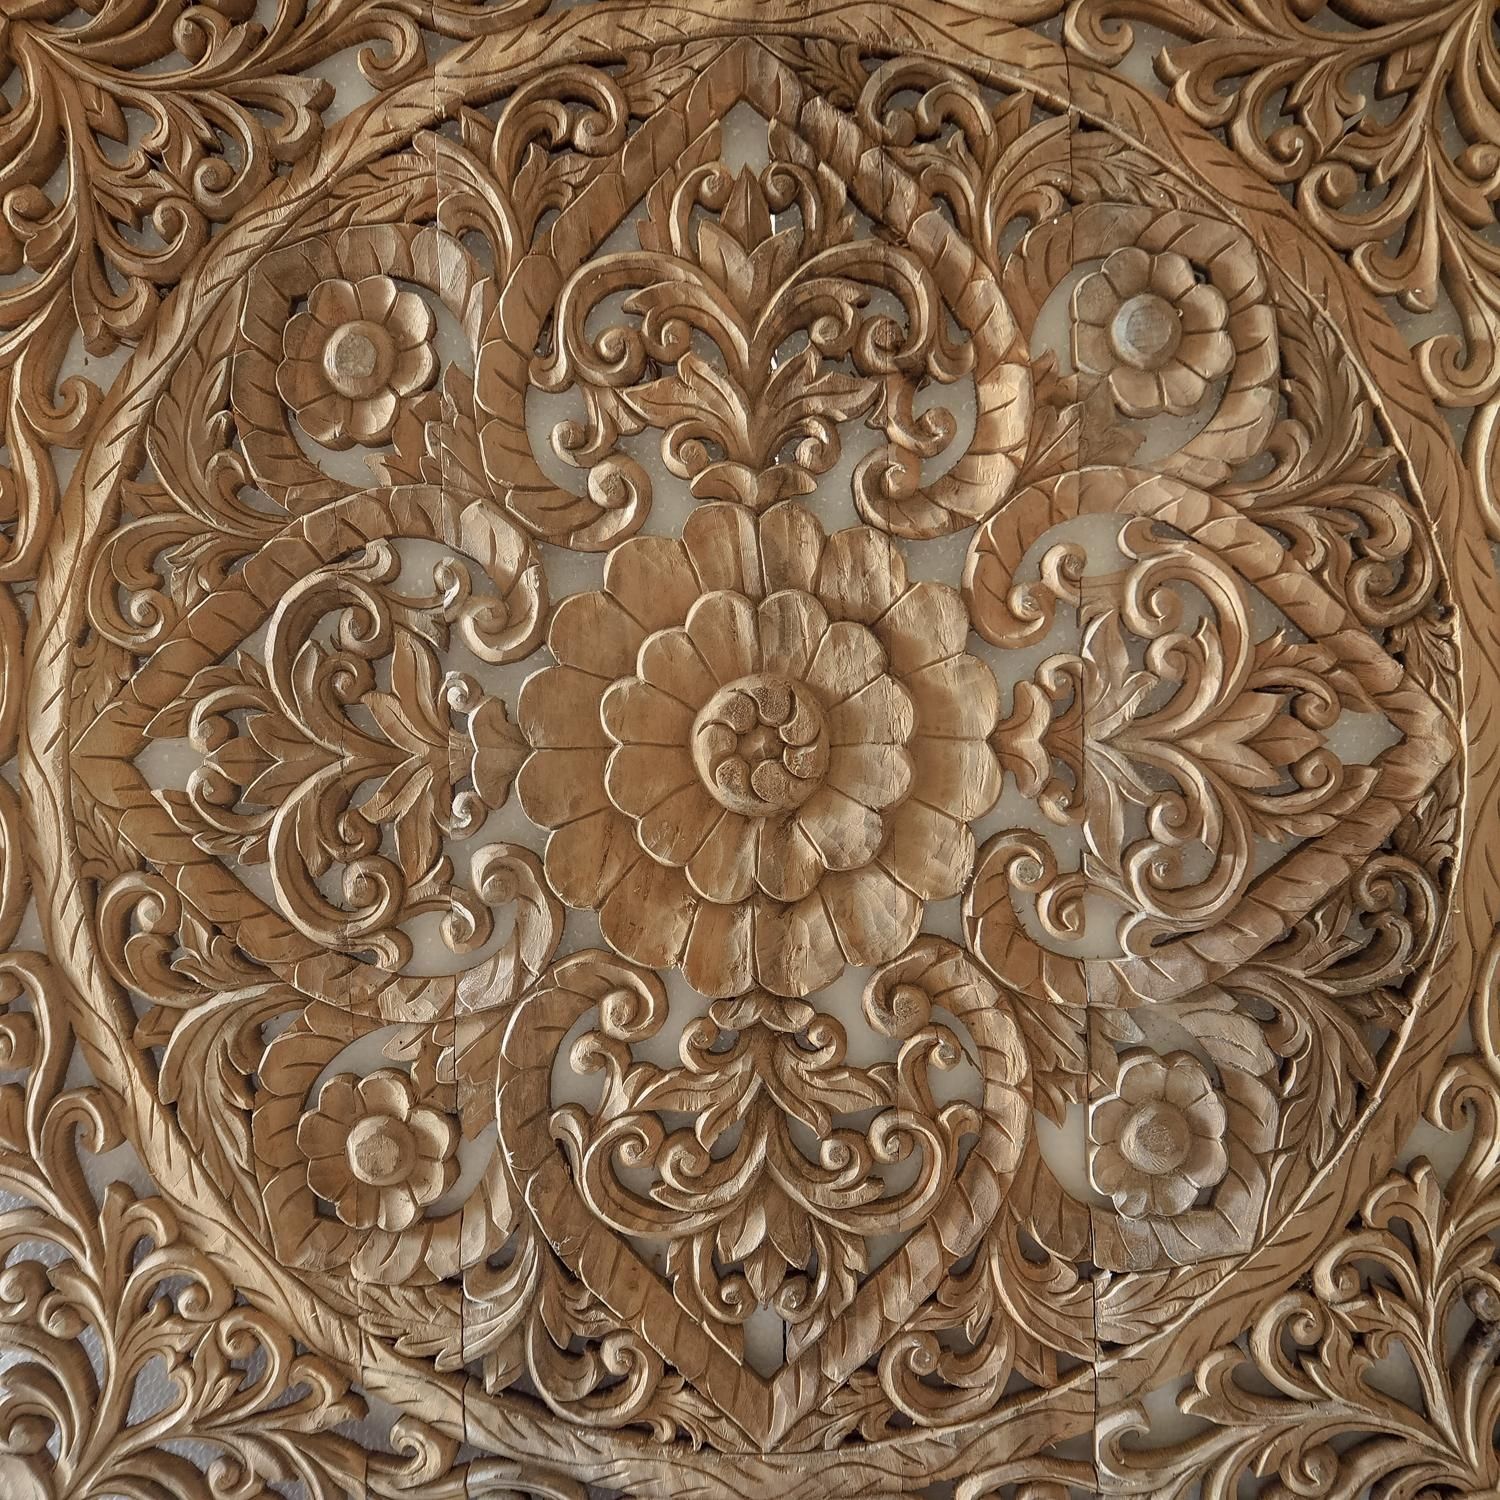 Hand Carved Wall Panel From Bali – Siam Sawadee Regarding Balinese Wall Art (View 1 of 20)